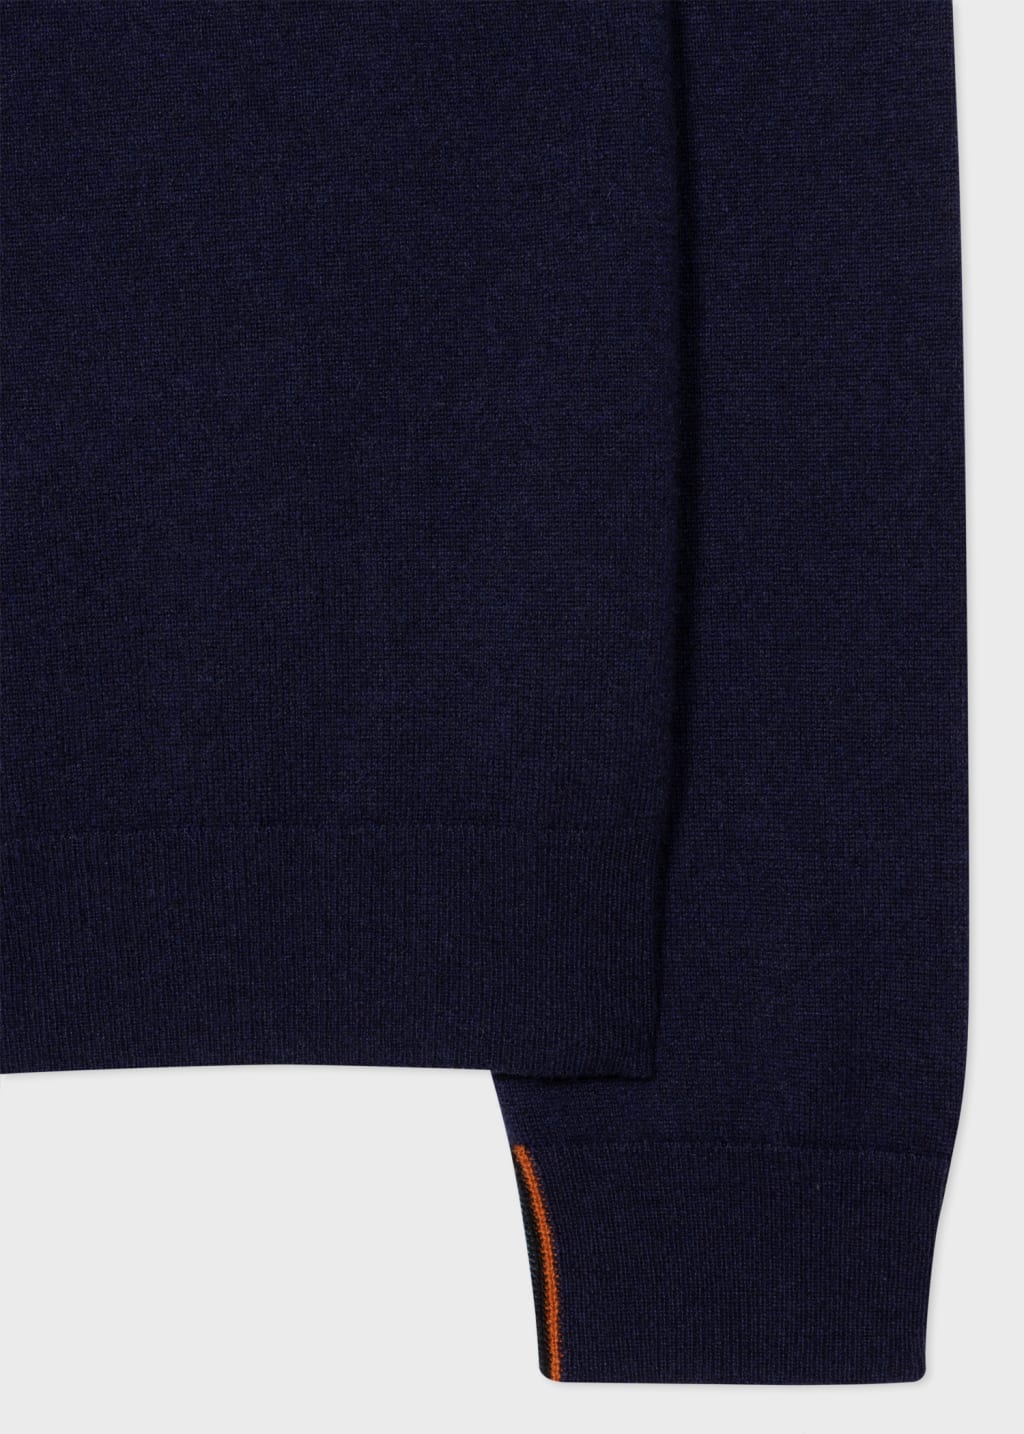 Detail View - Navy Cashmere Zip-Neck Sweater Paul Smith